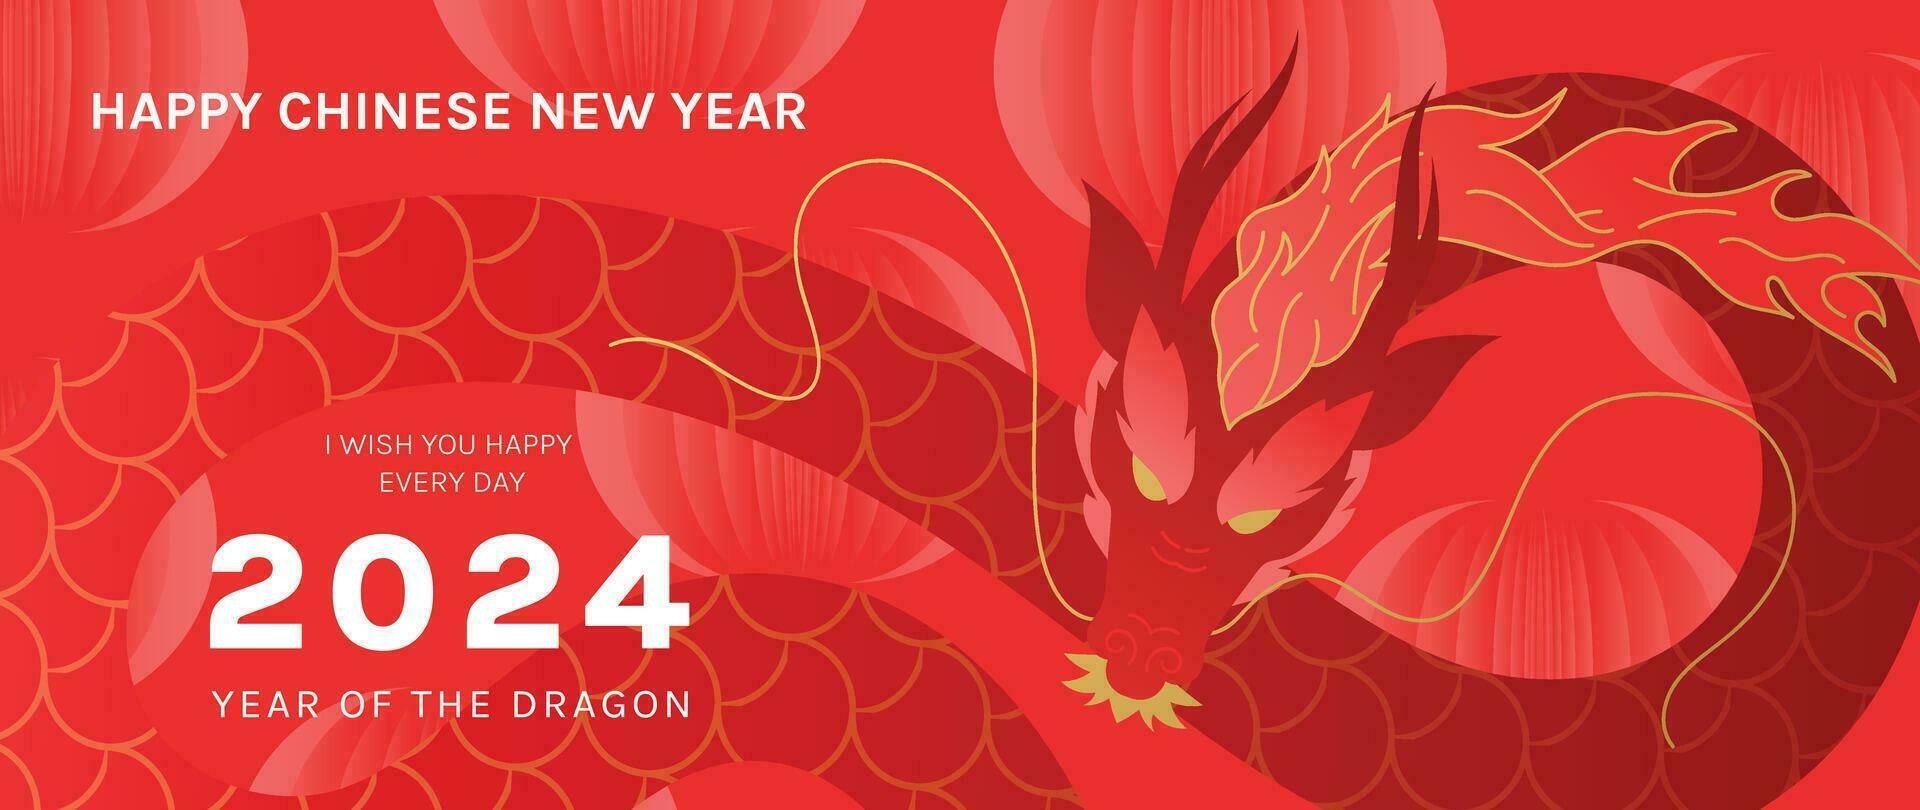 Happy Chinese new year background vector. Year of the dragon design wallpaper with dragon. chinese lantern. Modern luxury oriental illustration for cover, banner, website, decor. vector